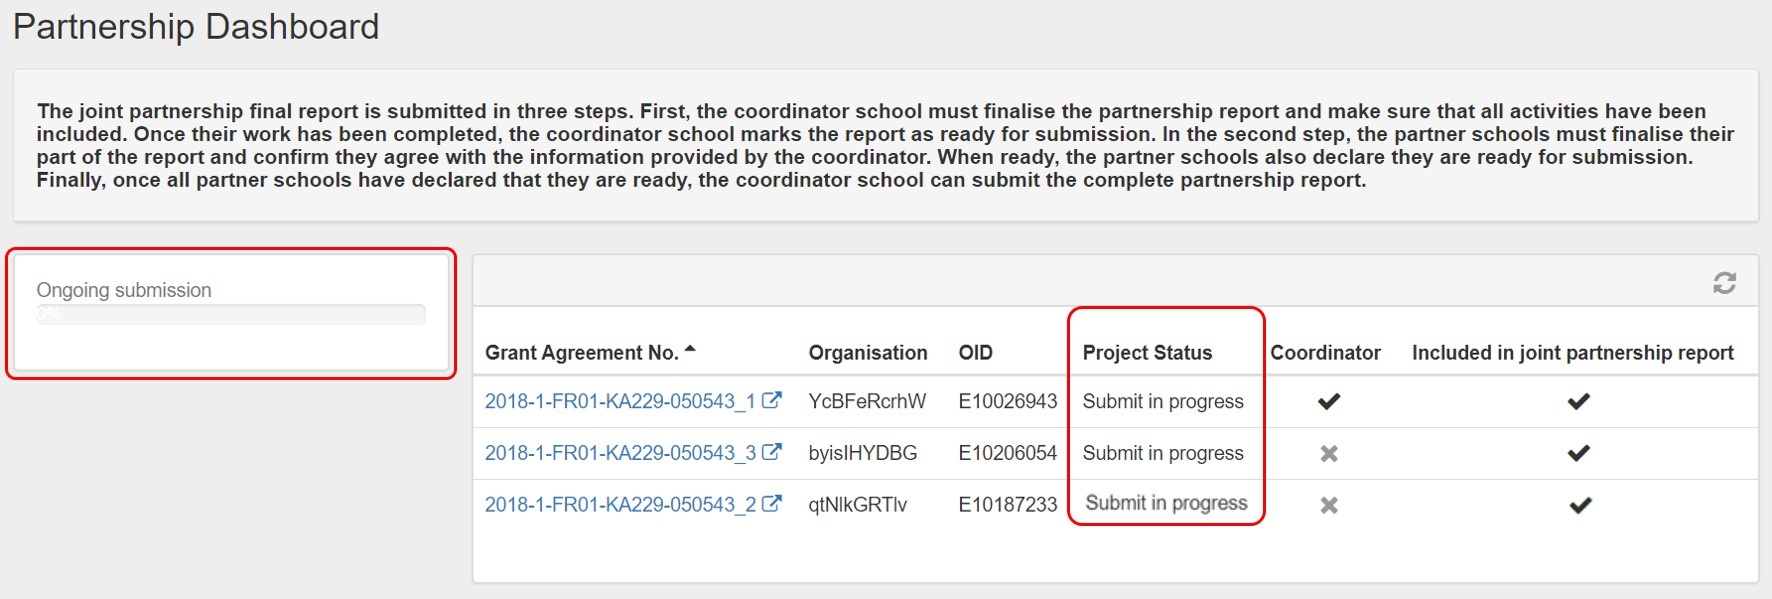 Project Submit in progress